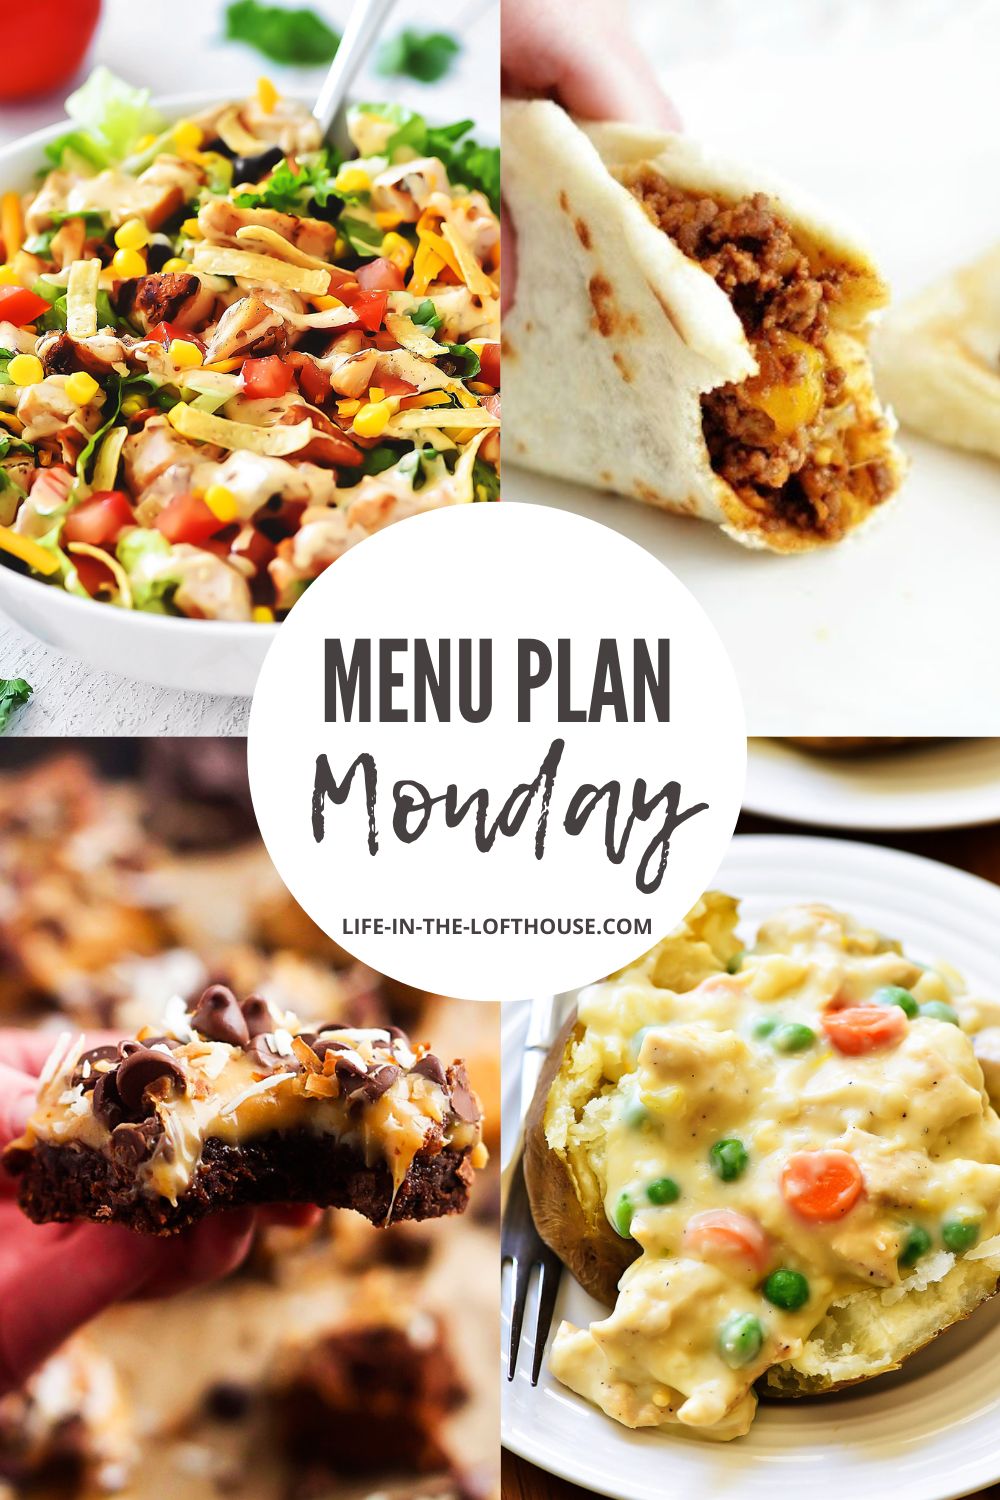 Menu Plan Monday is a list of six dinners and one dessert idea. Life-in-the-Lofthouse.com